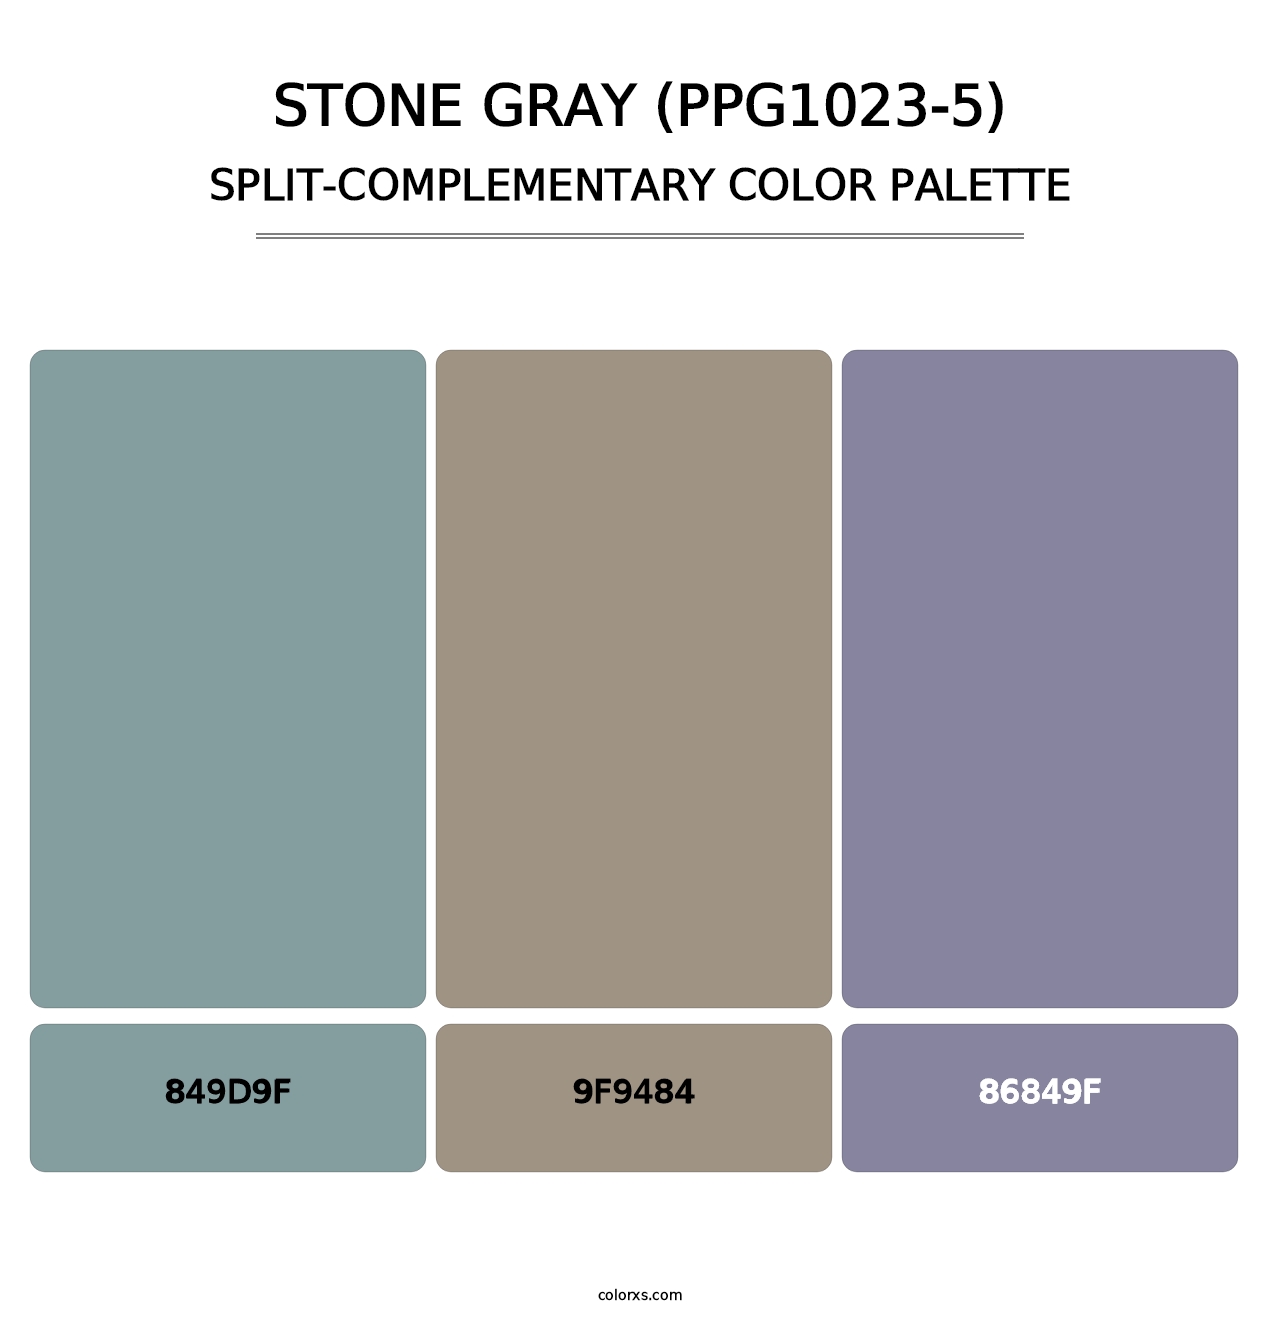 Stone Gray (PPG1023-5) - Split-Complementary Color Palette